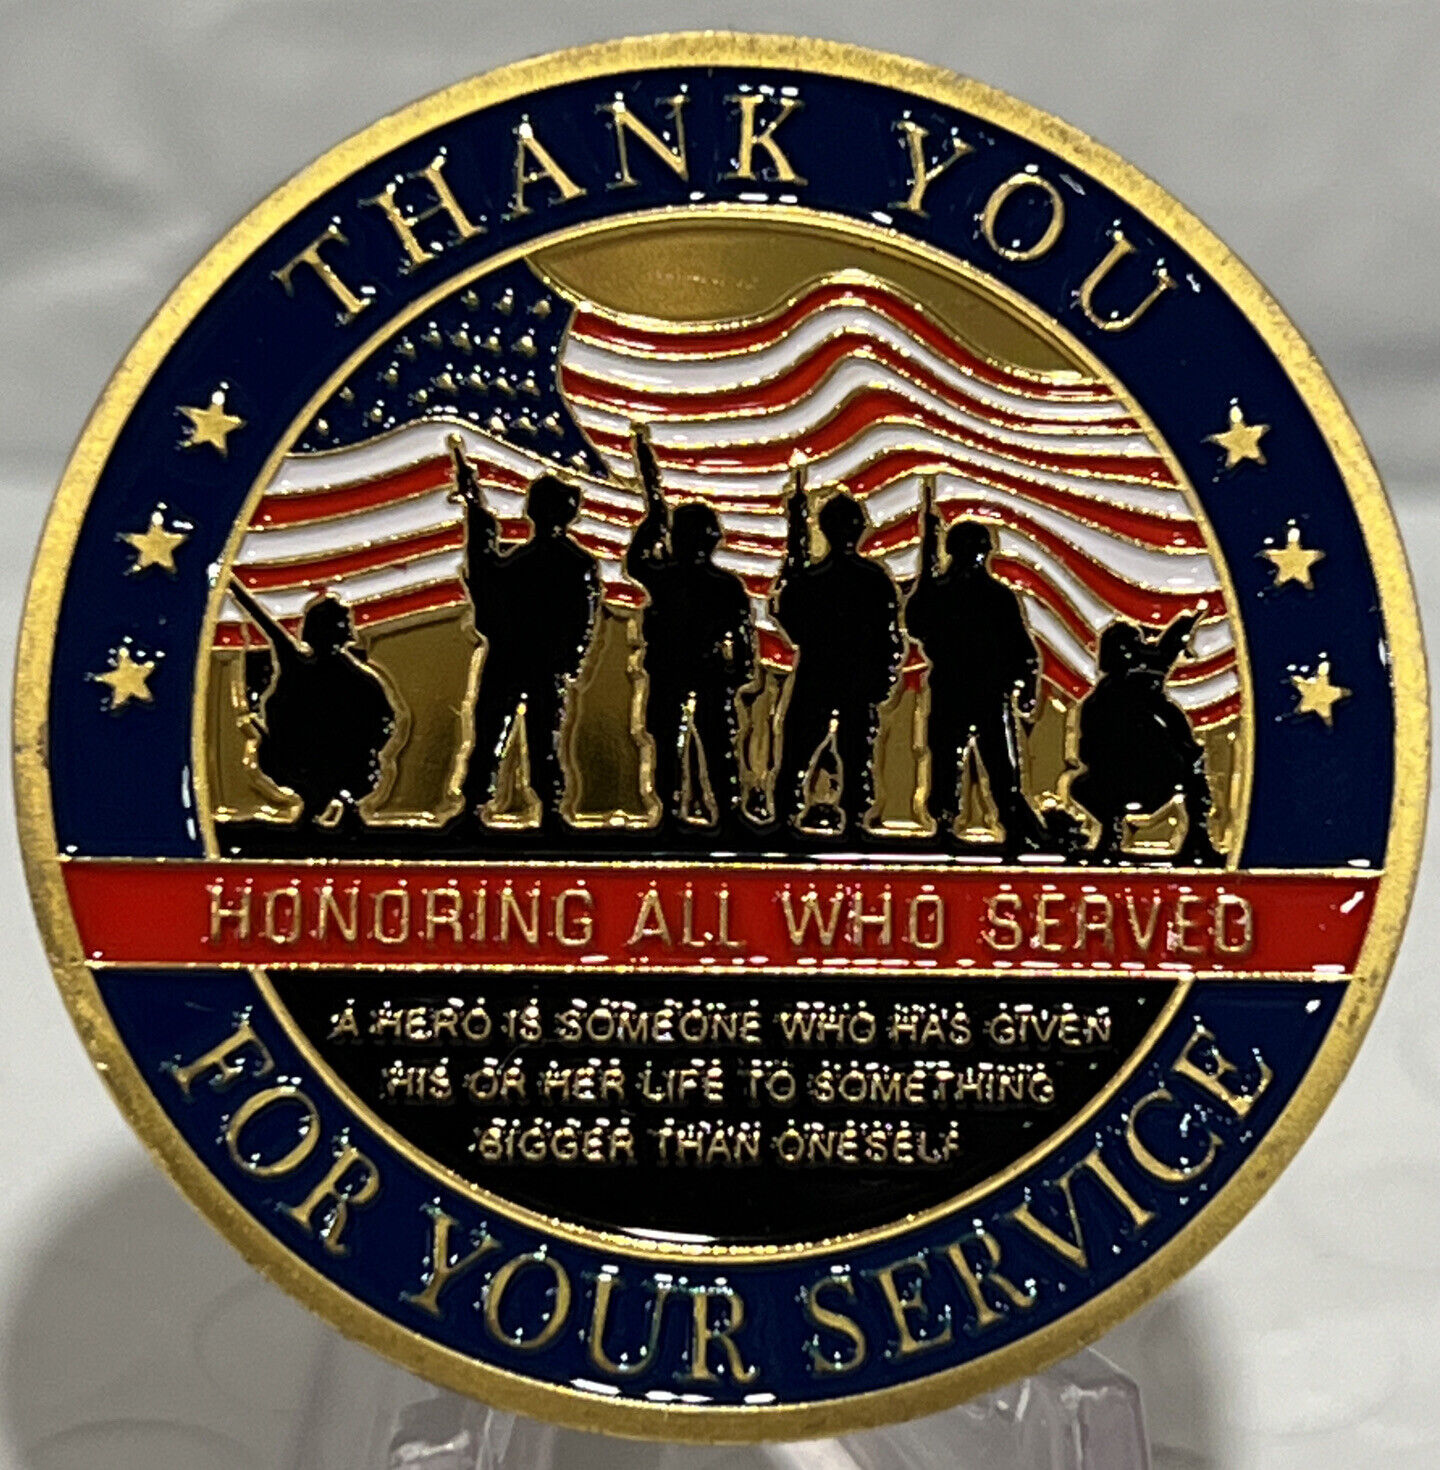 * 10 Pieces “Thank You Veteran for Your Service”Military Challenge Coin Honoring